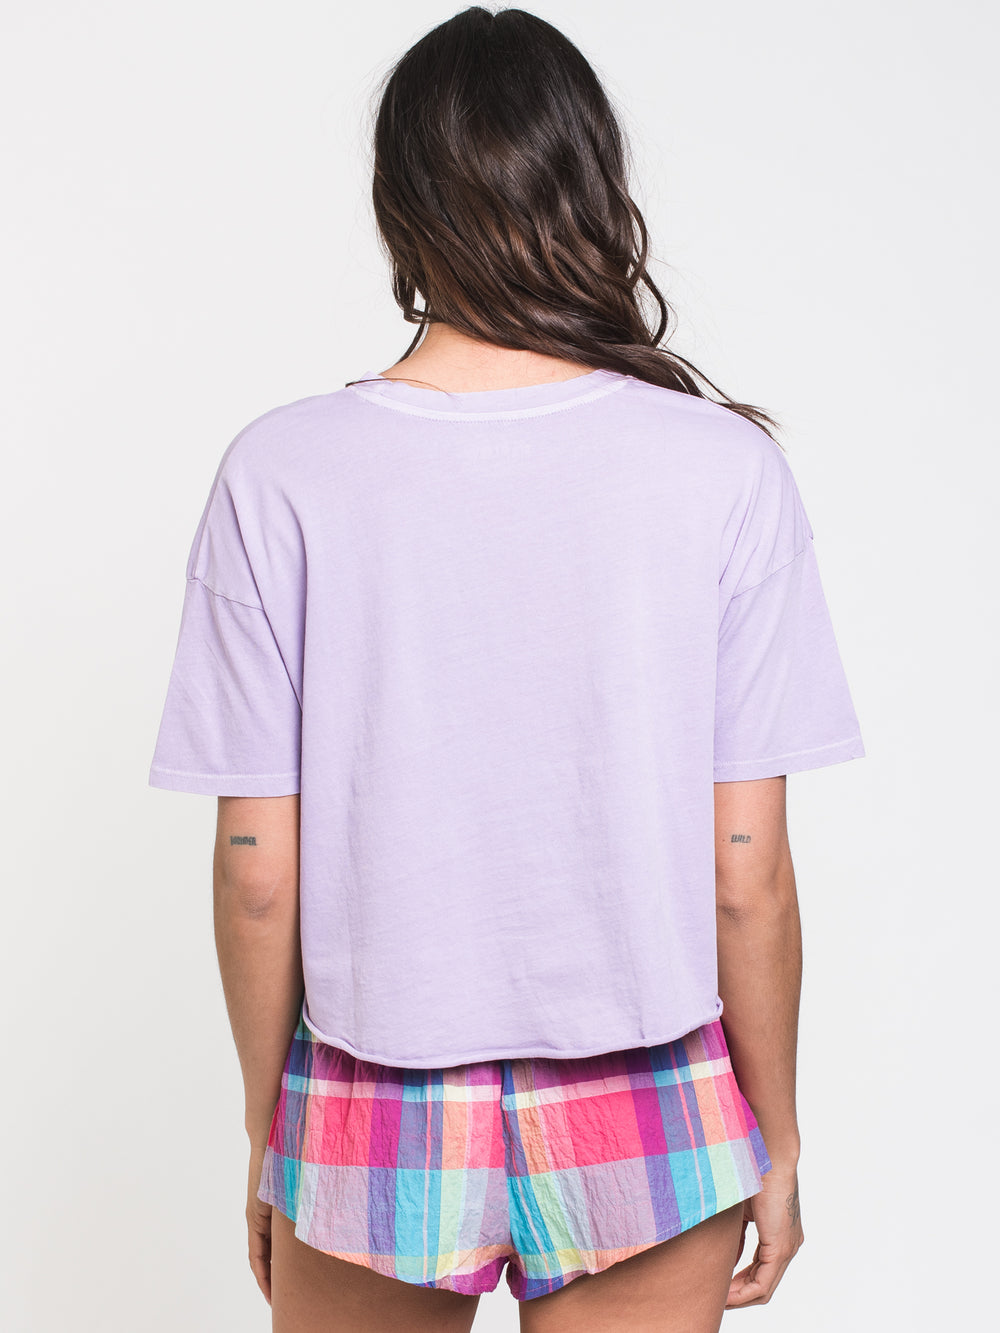 TEE-SHIRT BOXY HARLOW PIPER - DÉSTOCKAGE